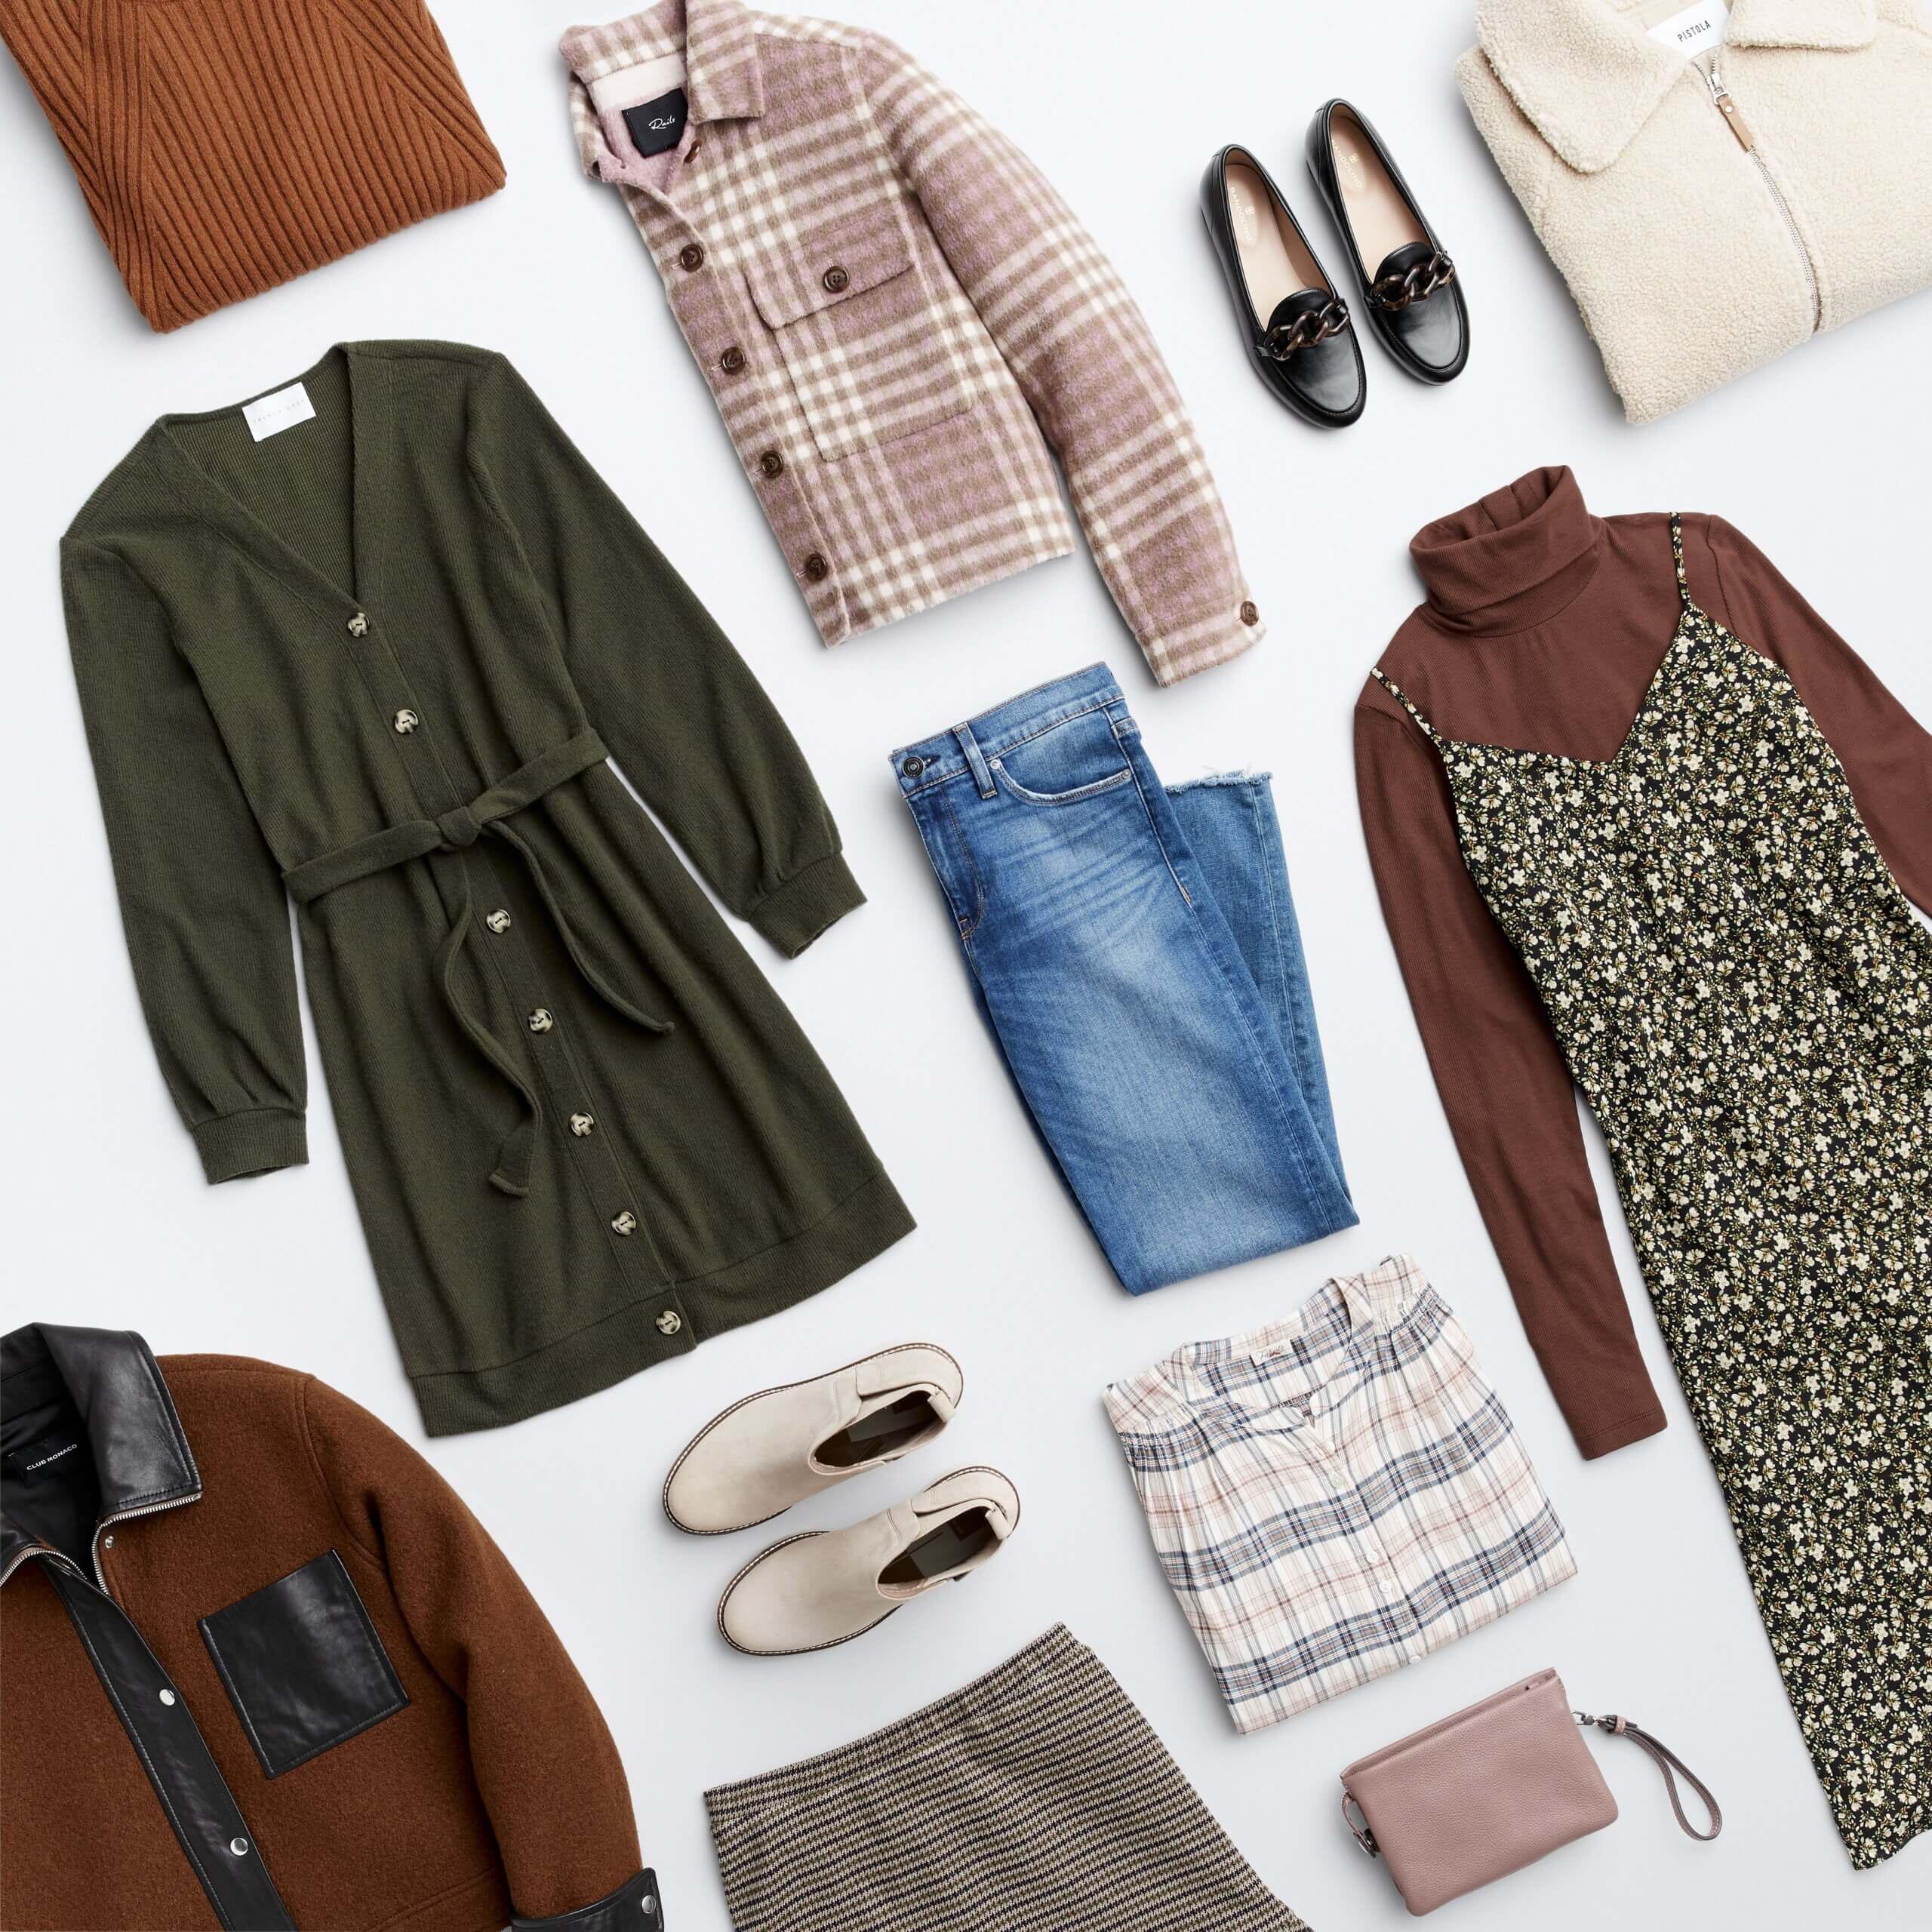 Stitch Fix women’s outfit laydown featuring grey button-front tie-waist dress, brown sweater, blush shacket, black loafers, cream fuzzy pullover, midi dress over brown turtleneck, blue jeans, blush pink blouse, blush clutch, white booties and brown fleece jacket. 